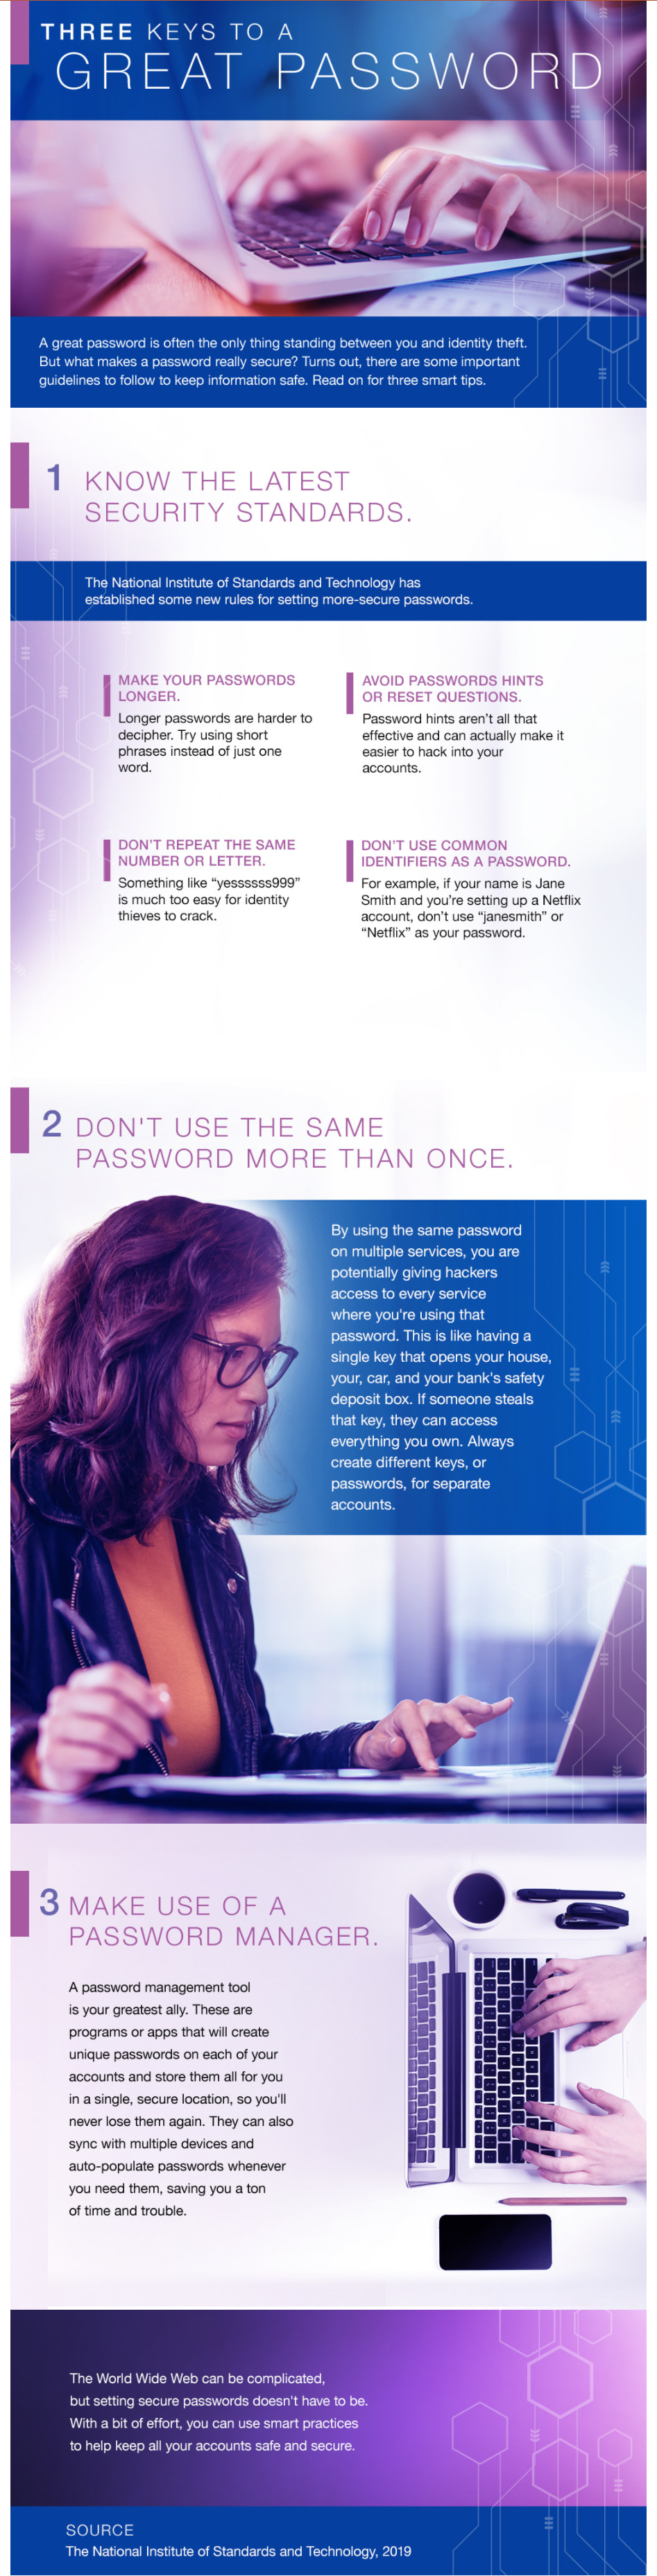 screencapture-asofsp-resource-center-lifestyle-the-three-keys-to-a-great-password-2021-11-05-21_22_54